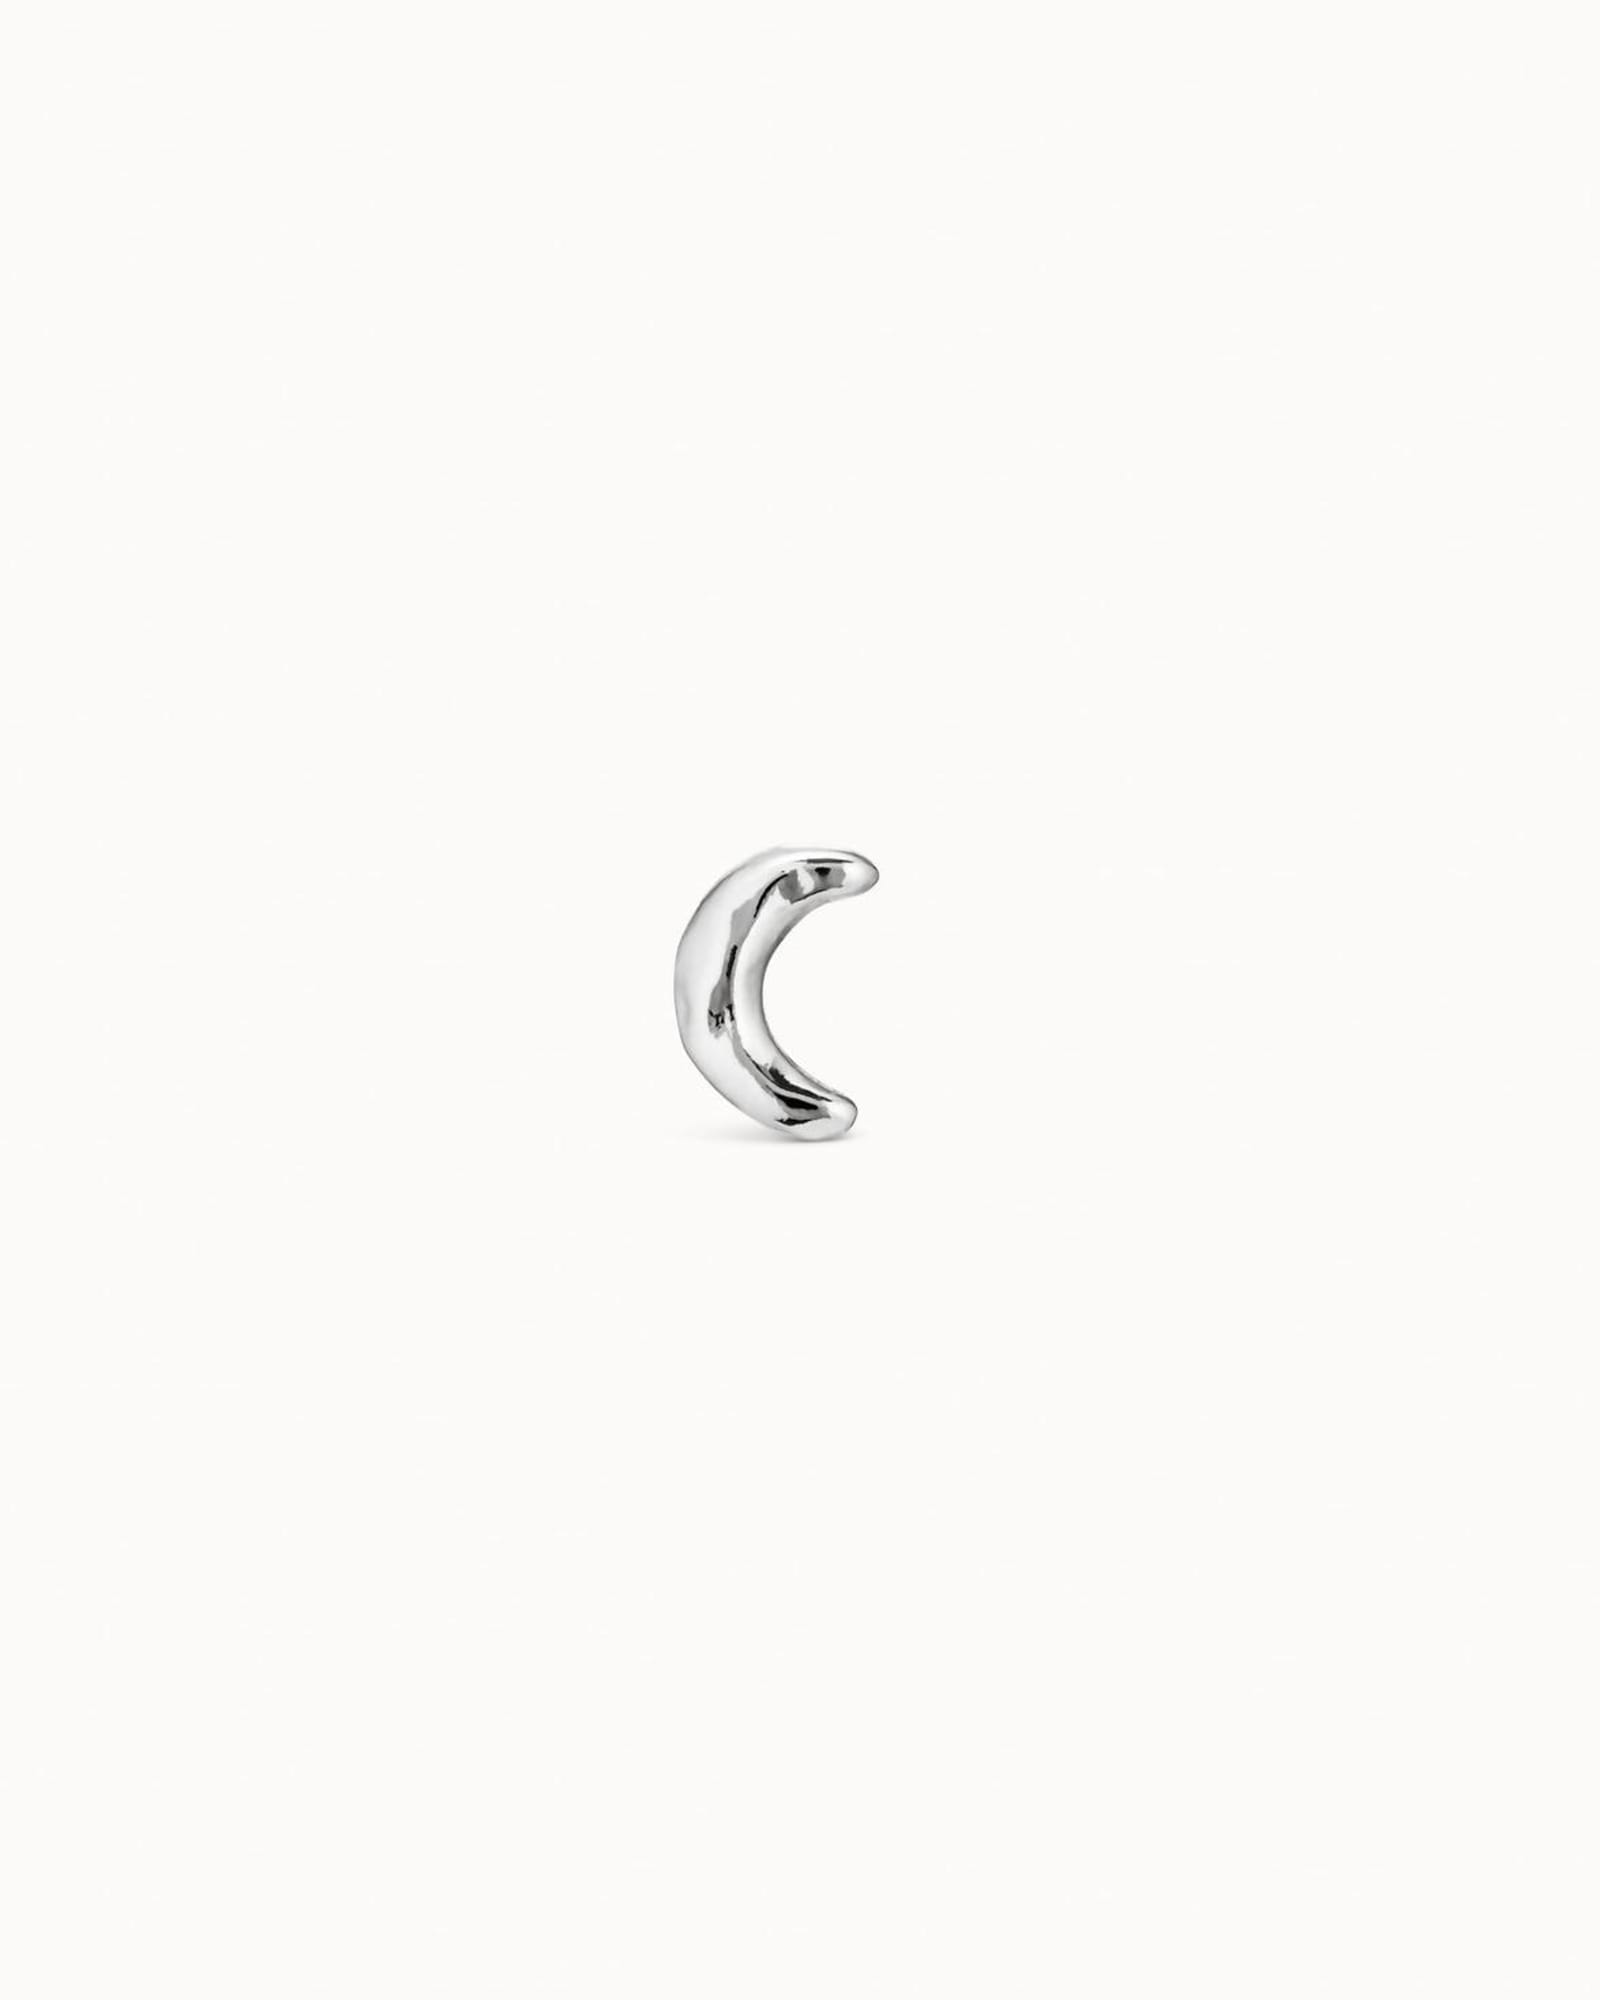 Moon Piercing Stud Earrings in Silver Plated | Silver Plated